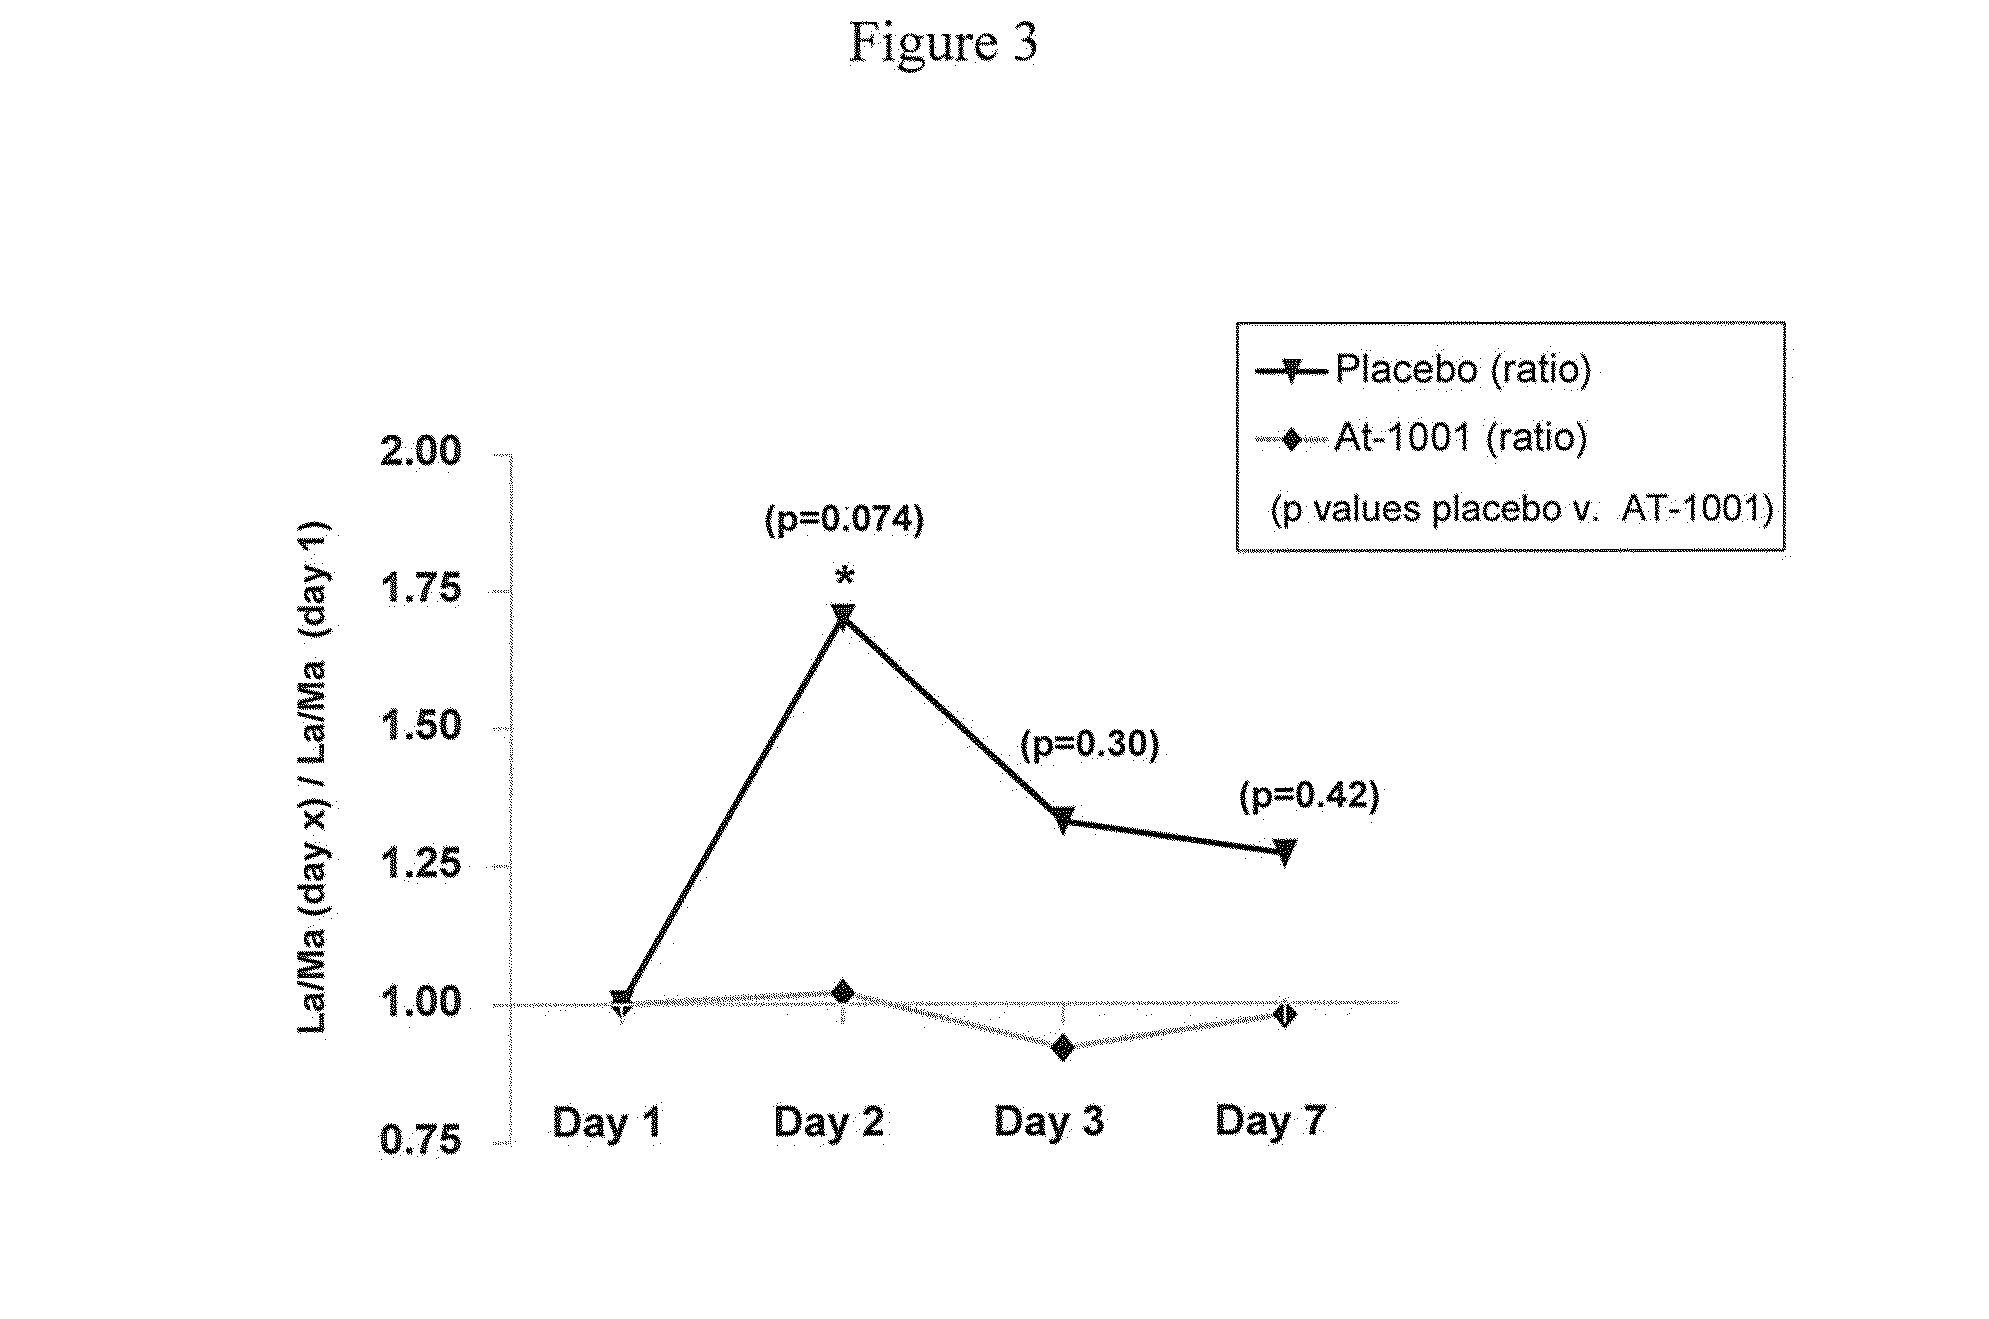 Materials and methods for the treatment of celiac disease